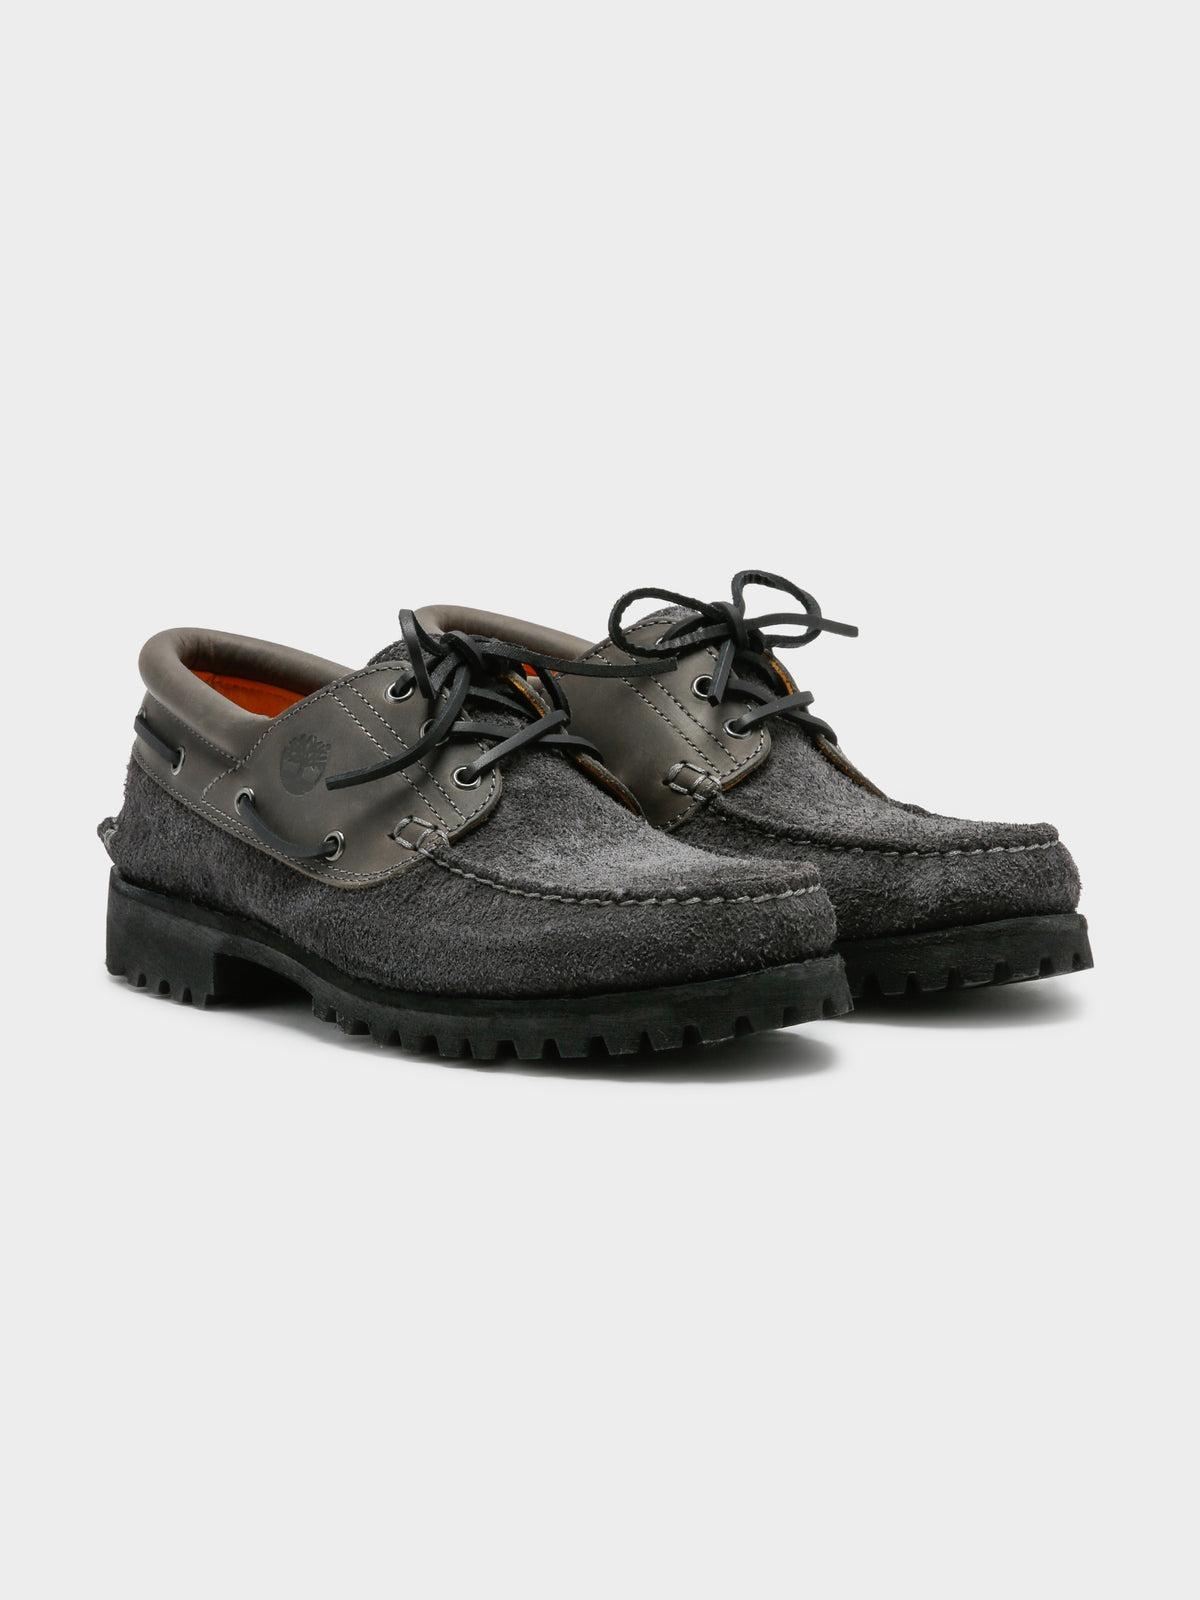 Mens Authentics 3 Eye Boat Shoes in Black